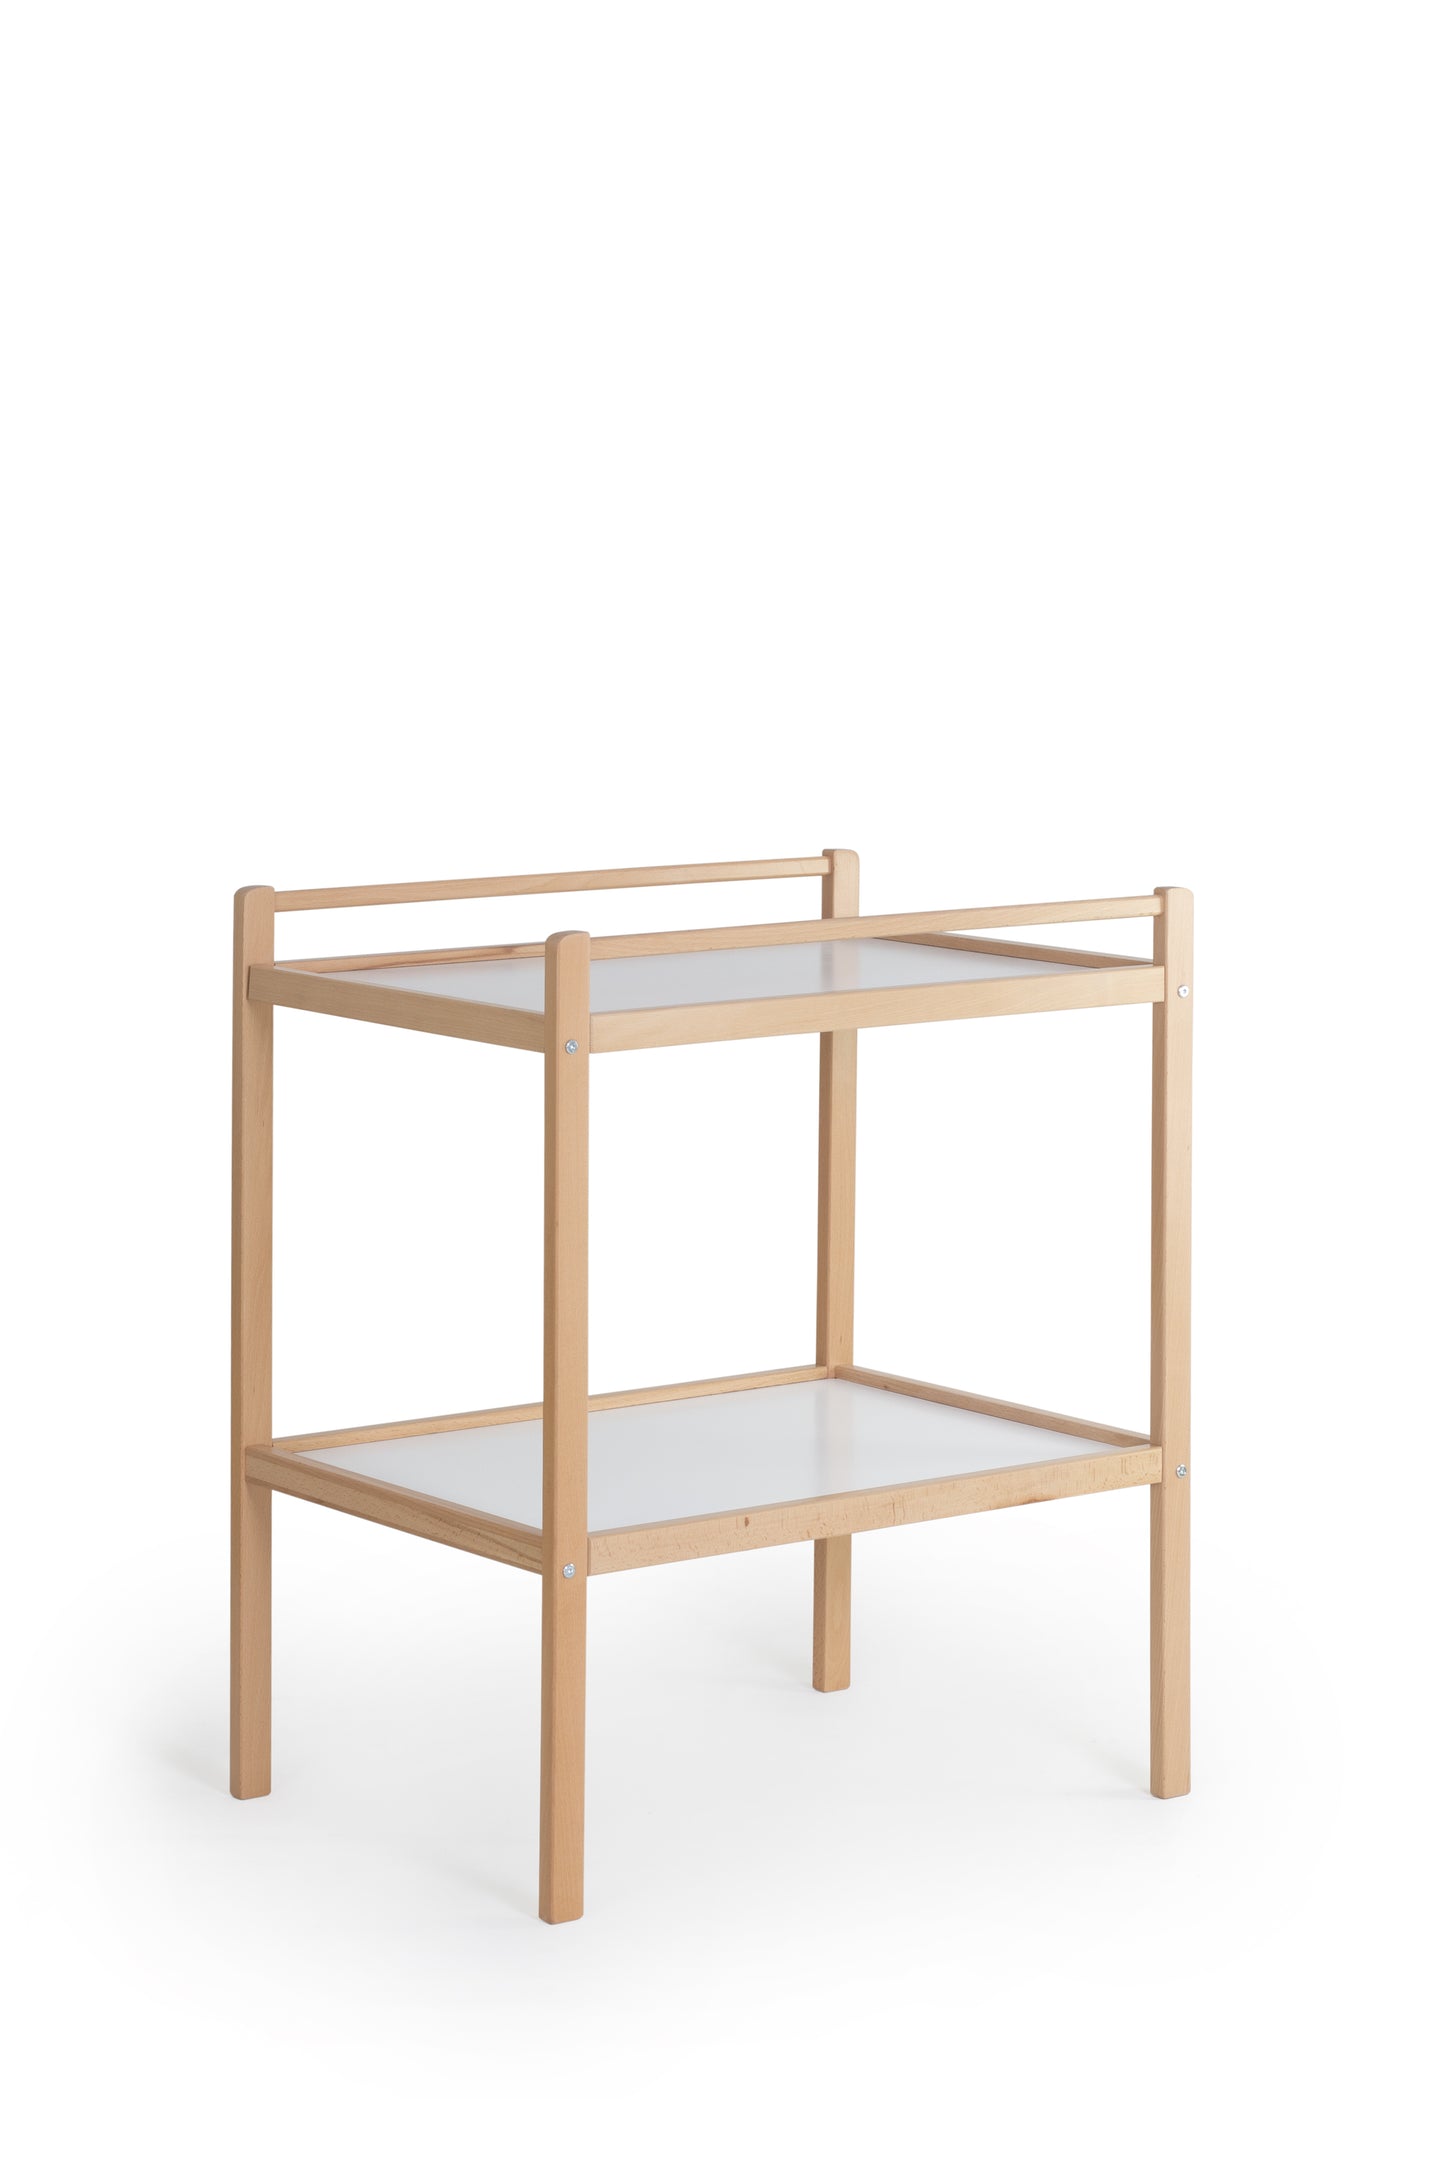 Aline - Changing table